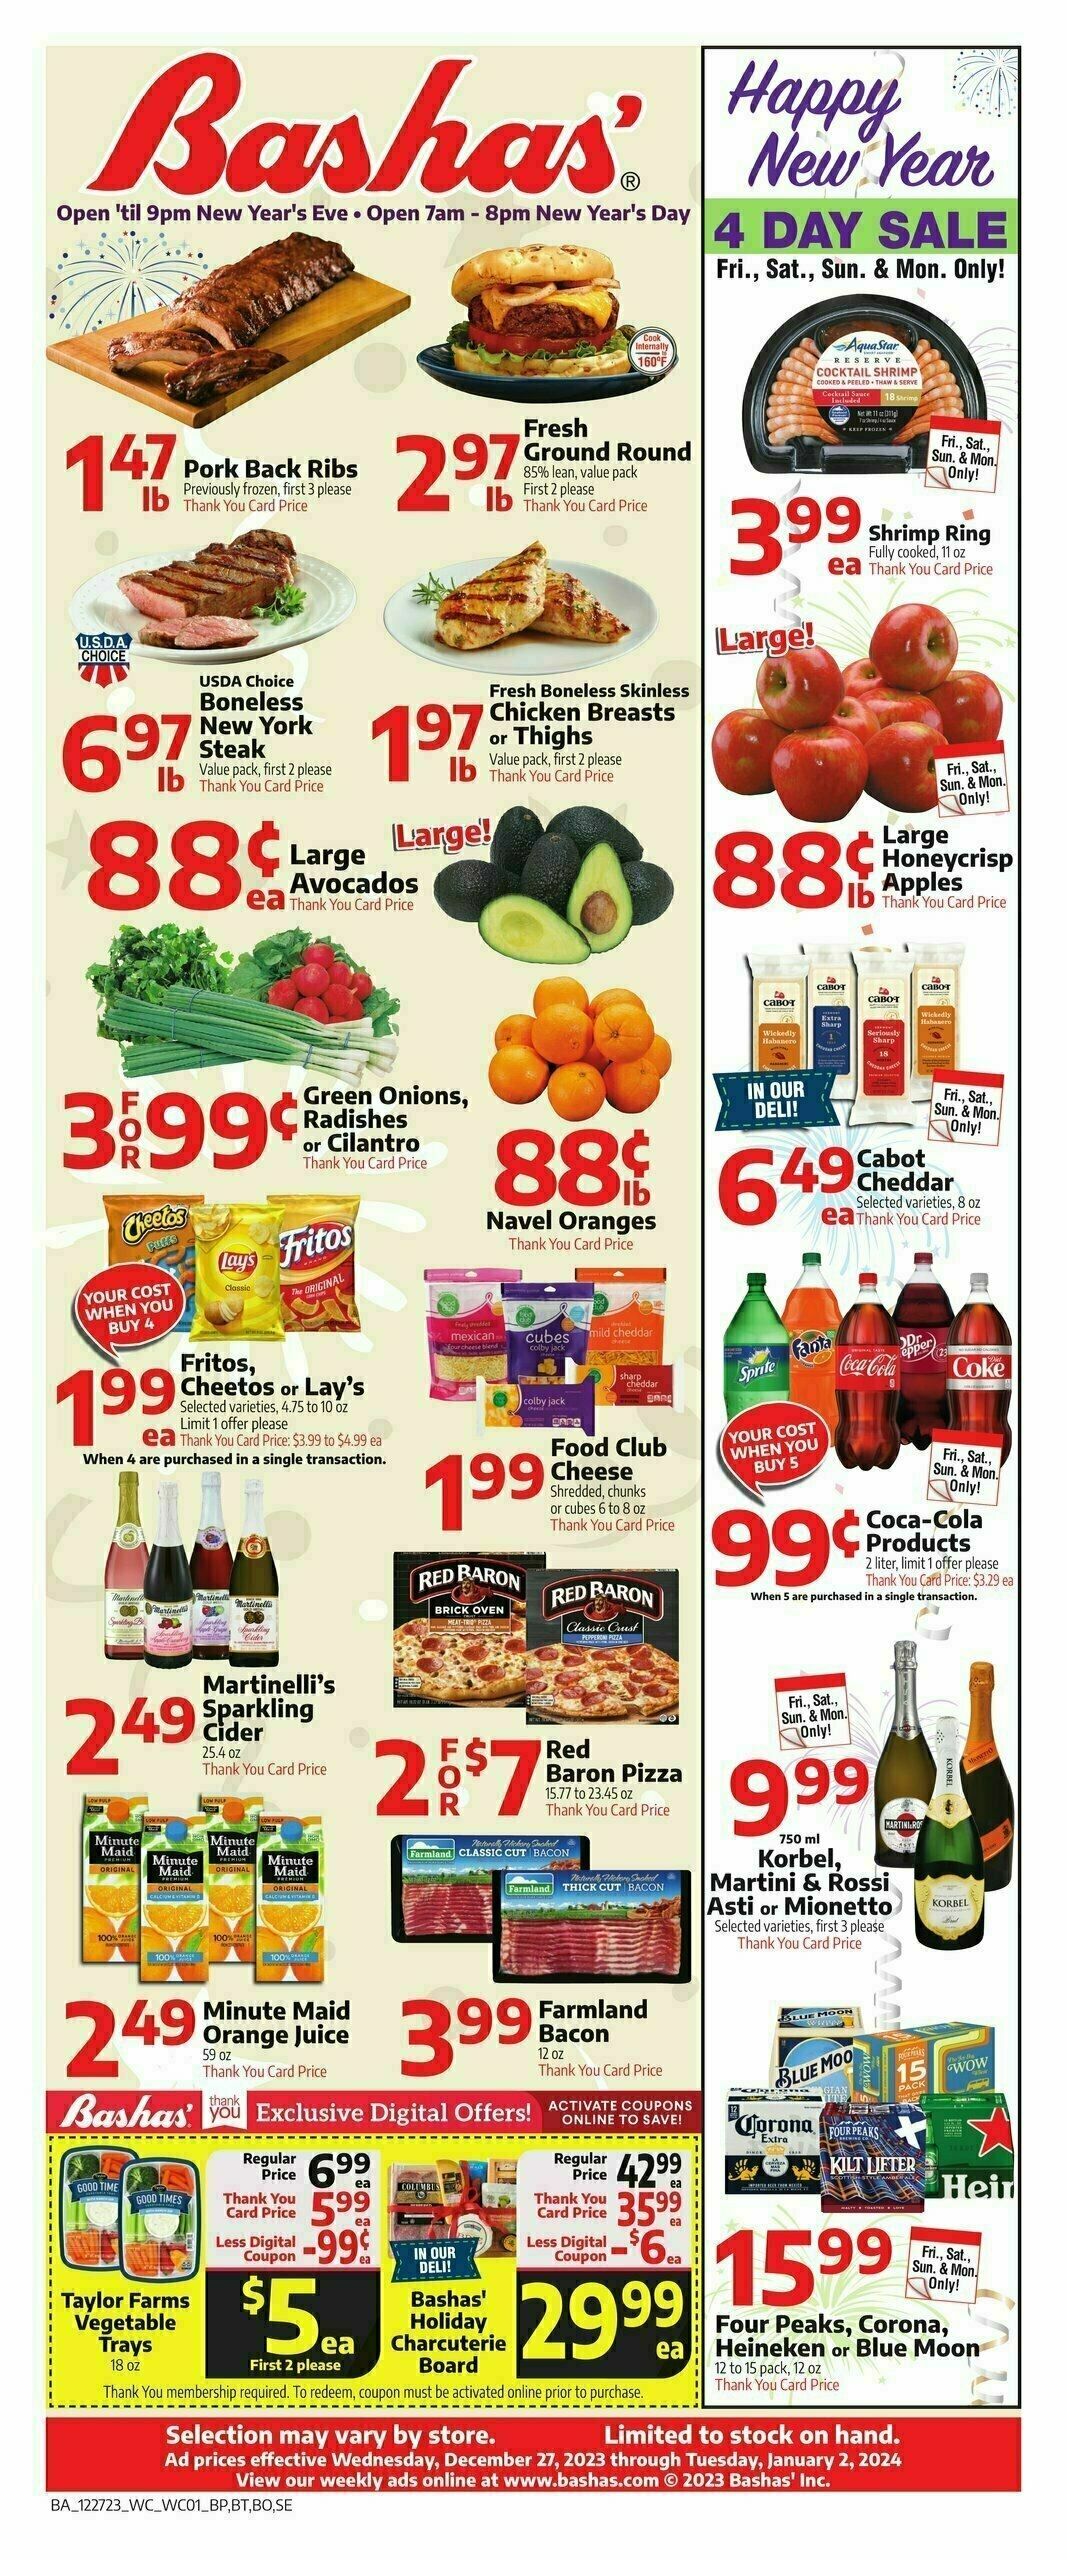 Bashas Weekly Ad from December 27